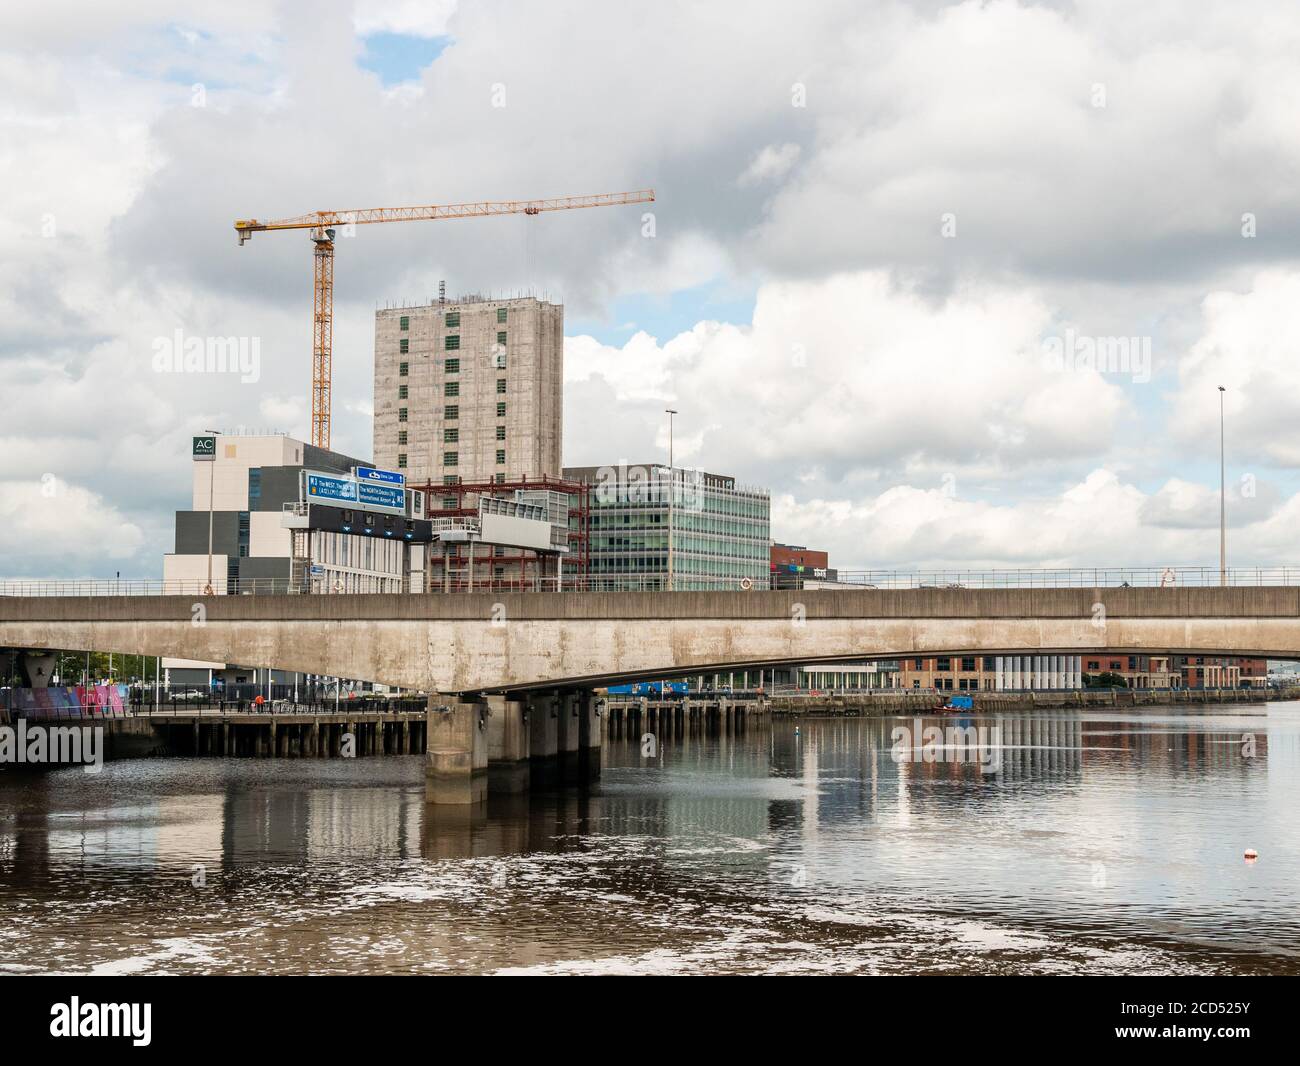 Belfast, Northern Ireland, UK, 26 August 2020: The City Quays development continues with City Quays 3. The 270 foot high, 250,000 square foot building will cost £50m and is due for completion in 2021. The City Quays development offers premium office space at Donegall Quay, near Clerendon Dock Stock Photo